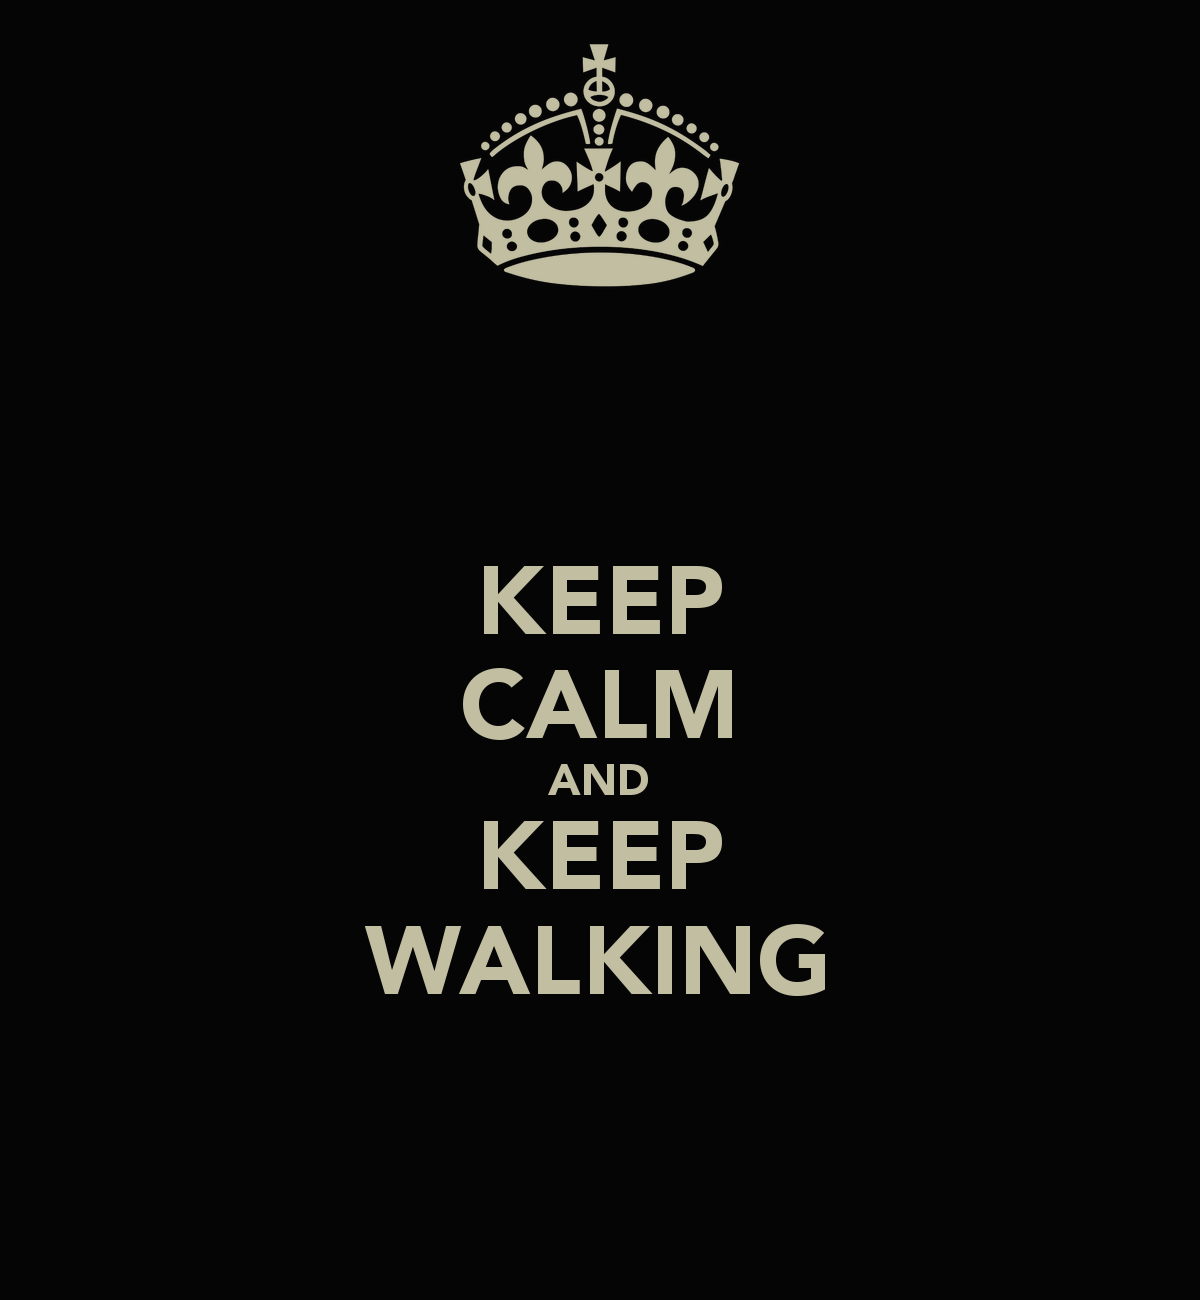 onthesannyside: Keep calm and keep walking (it may save your life)!